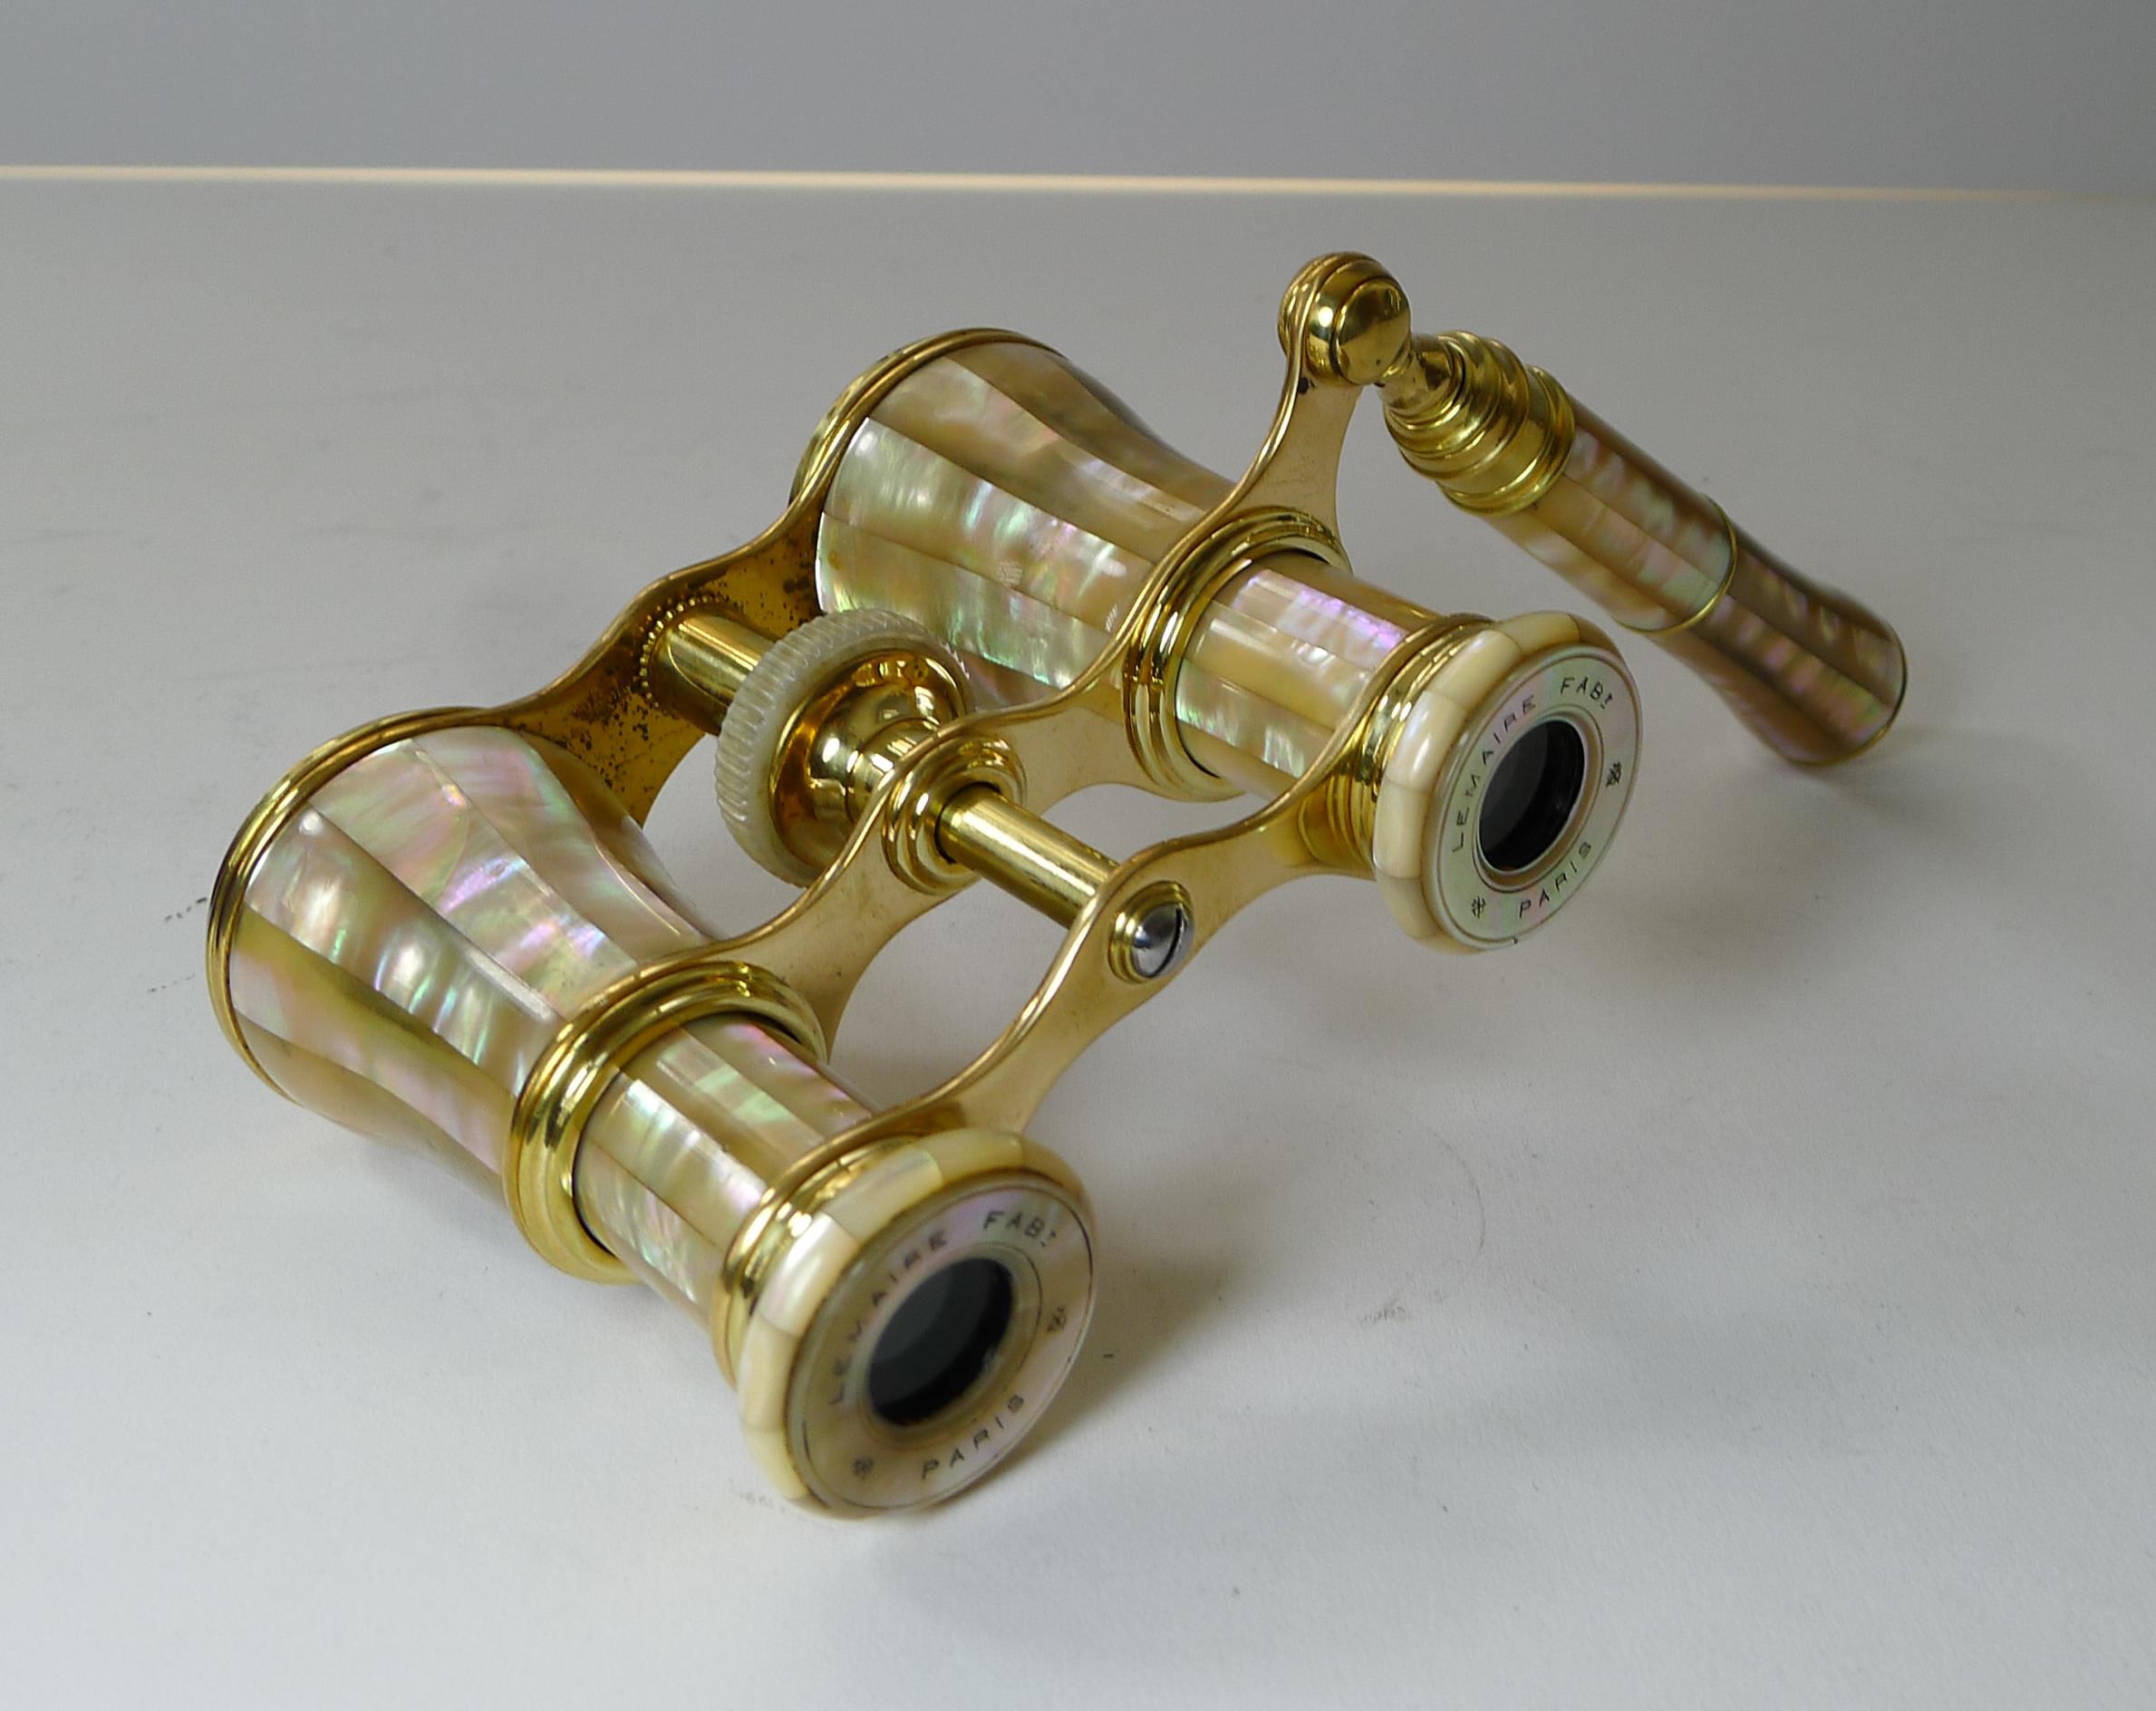 A rare find, this is one of the finest pairs of Mother of Pearl Opera glasses we have had in many years. Of course they are made by the finest French manufacturer, LeMaire of Paris. 

Each of the eye pieces has the engraved and inked signature